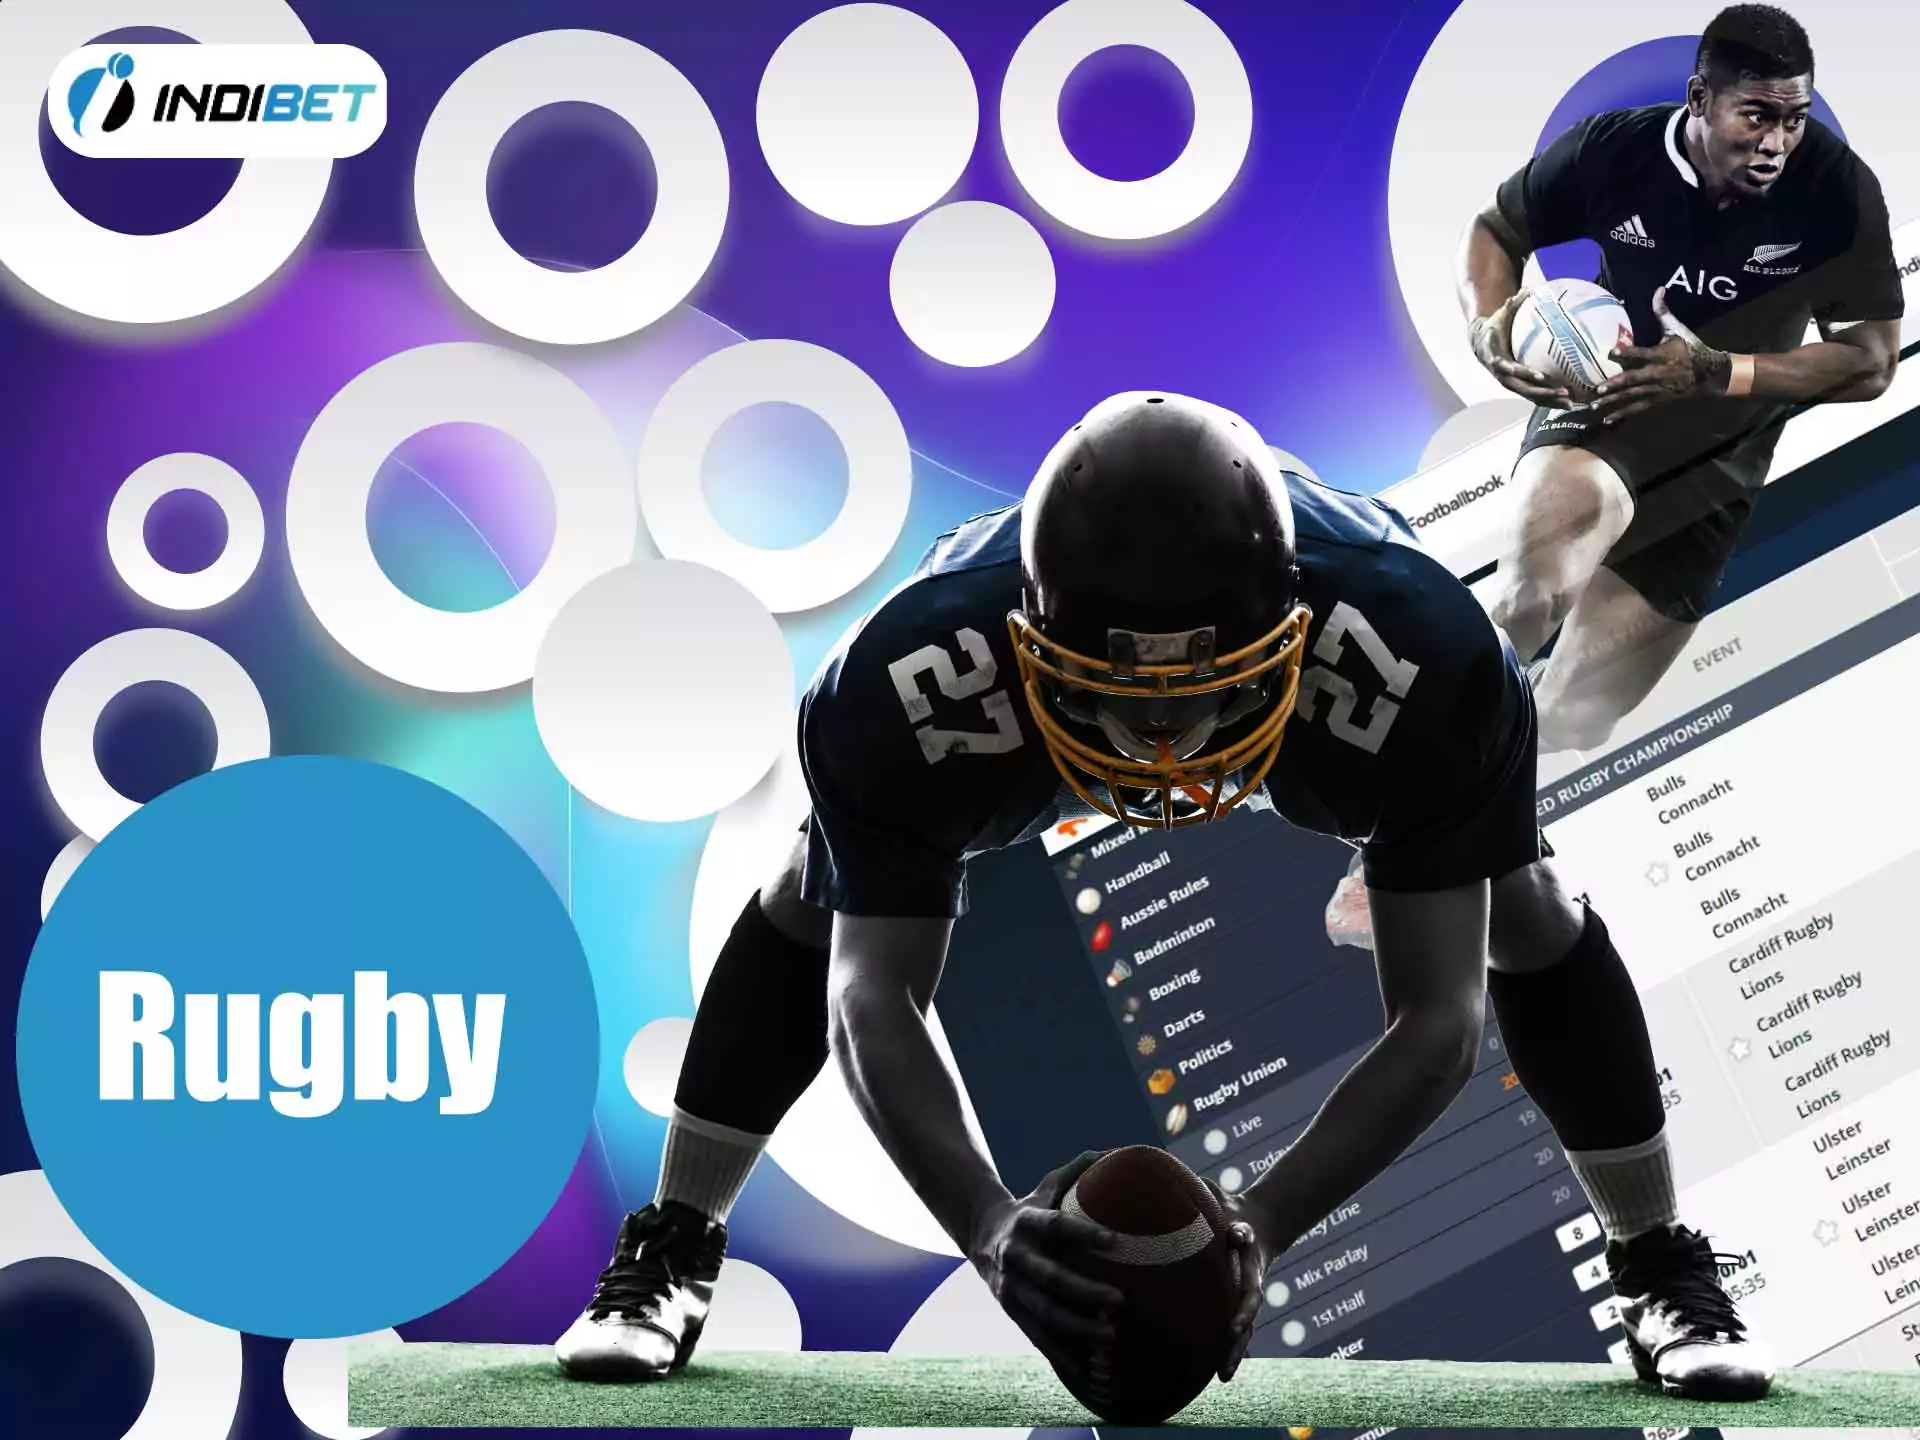 Place bets on the rugby events in the Indibet app.